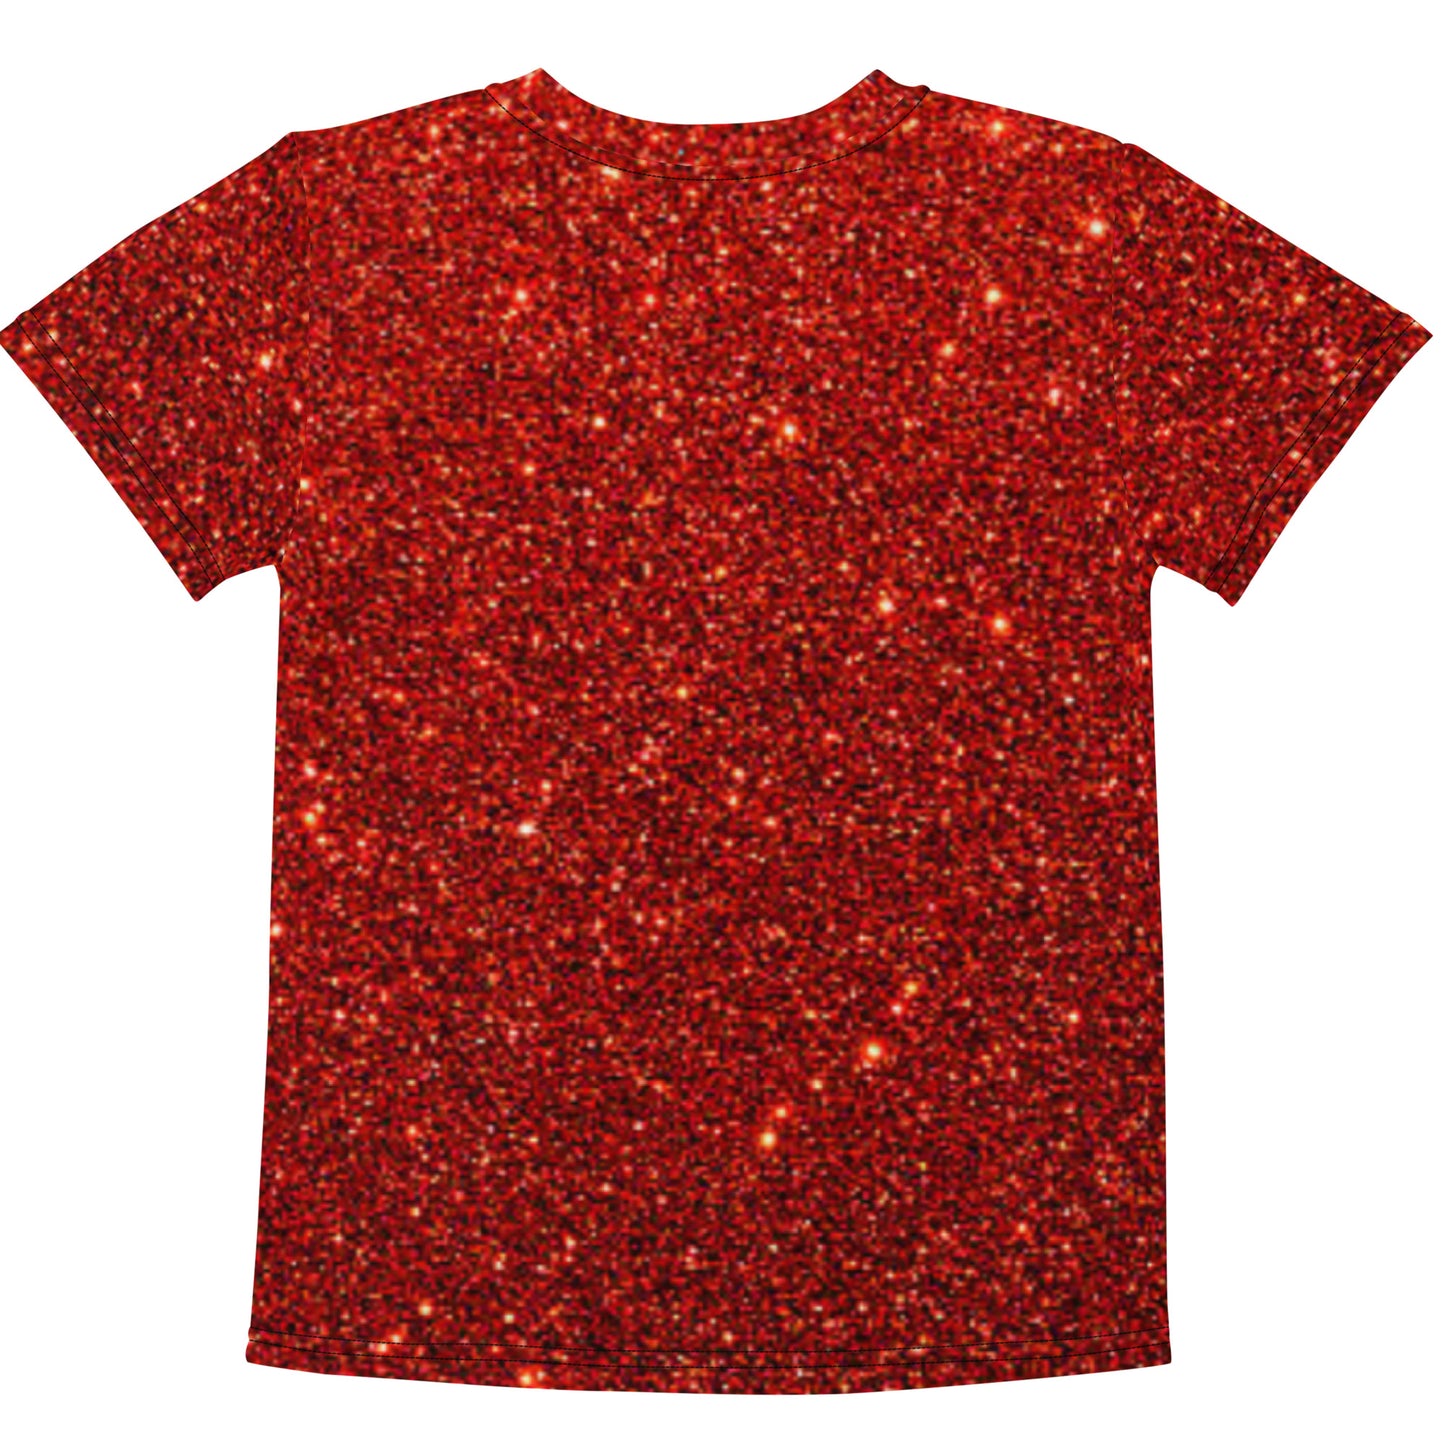 Holiday Kids Tee Set  in Red Sparkle